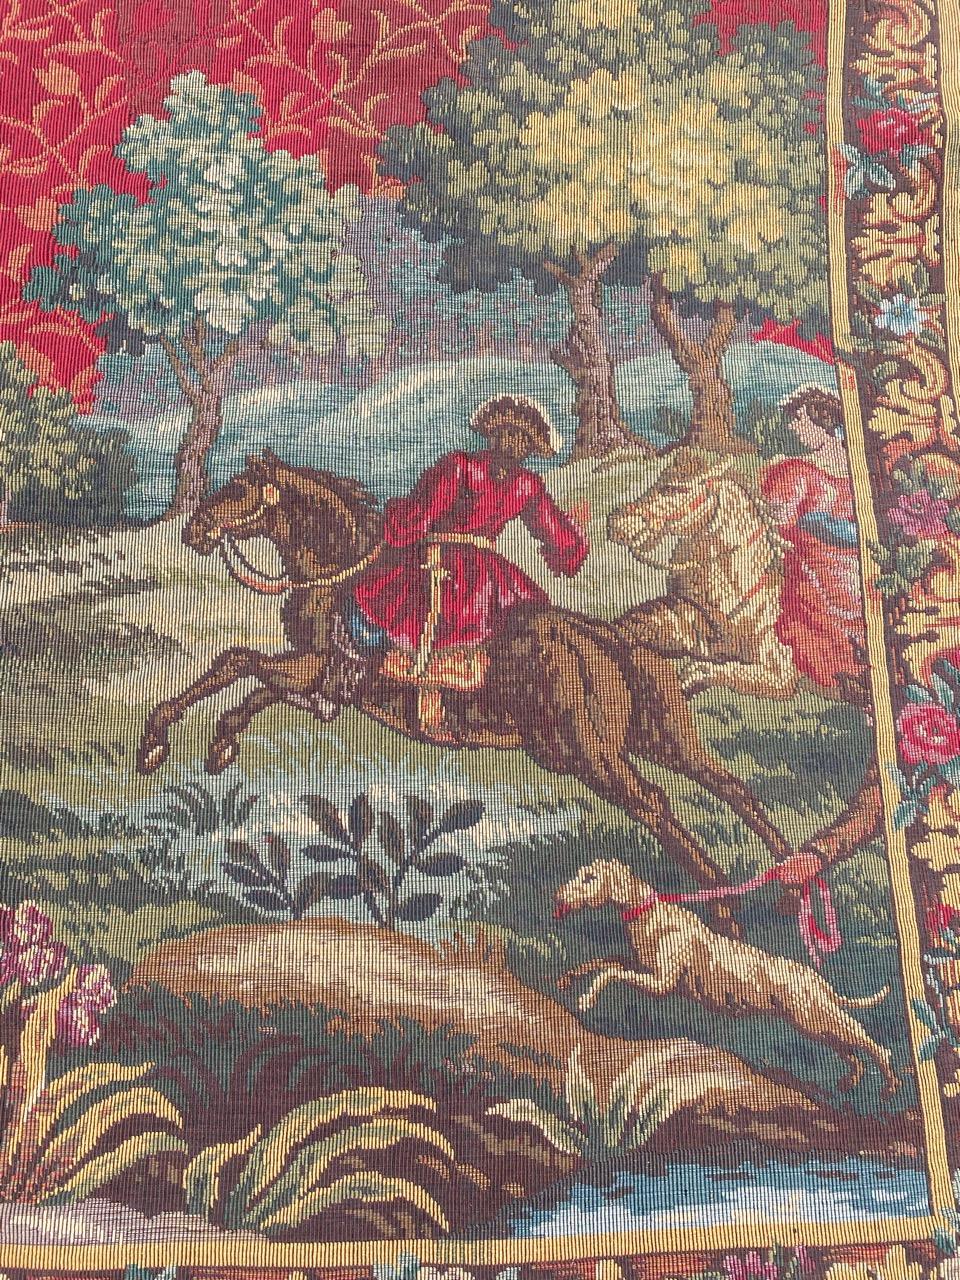 Nice 20th century french tapestry with a medieval hunt design and beautiful colors with a red sky color, mechanical Jaquar manufacturing with wool and cotton.

✨✨✨
